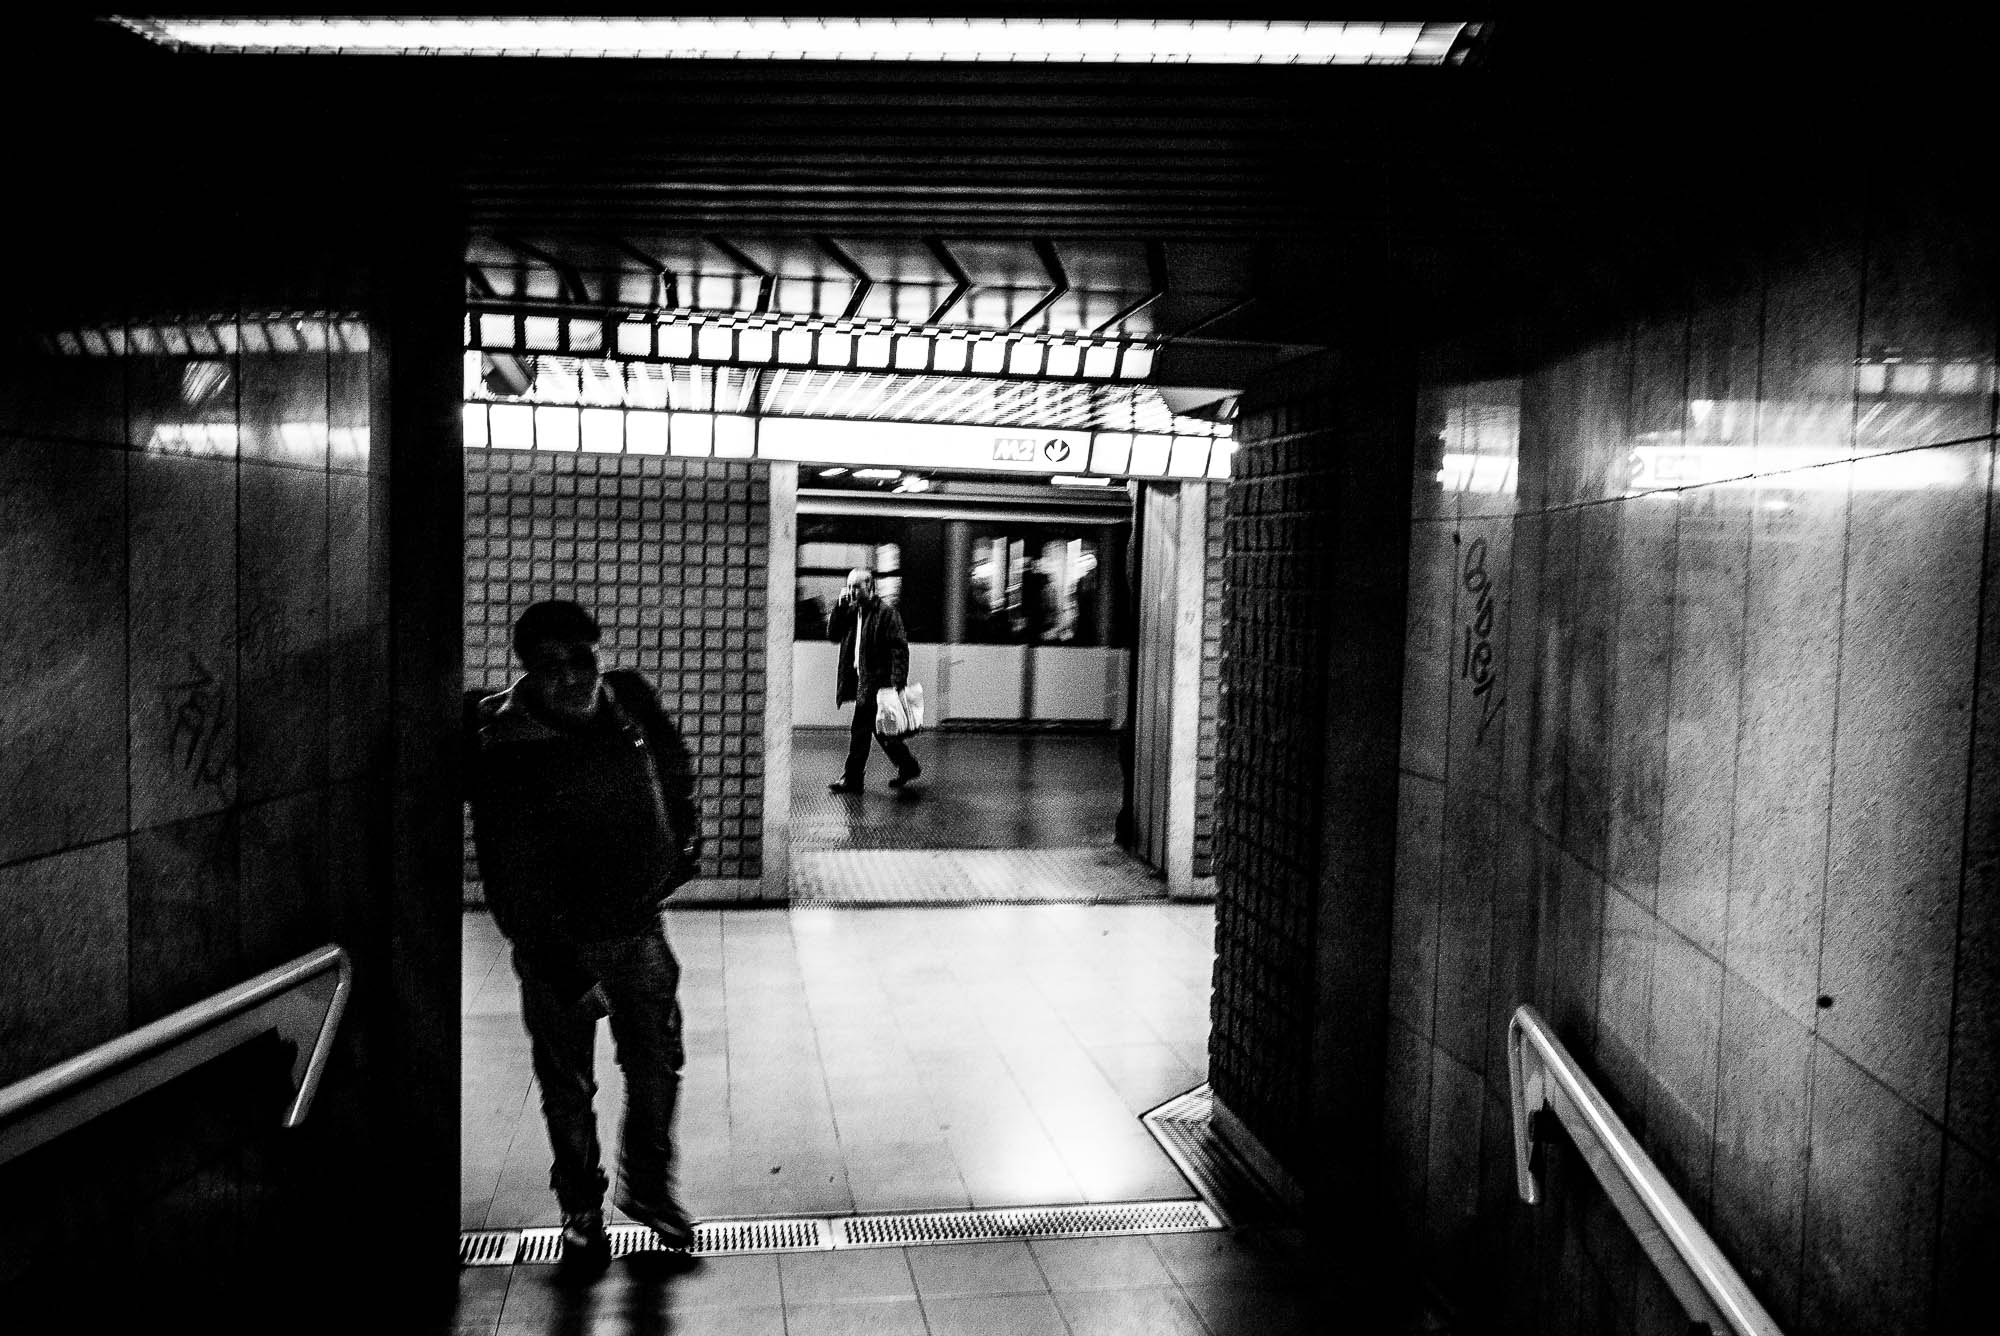 Summicron-M 1:2/28 ASPH. sample photo. In the subway photography